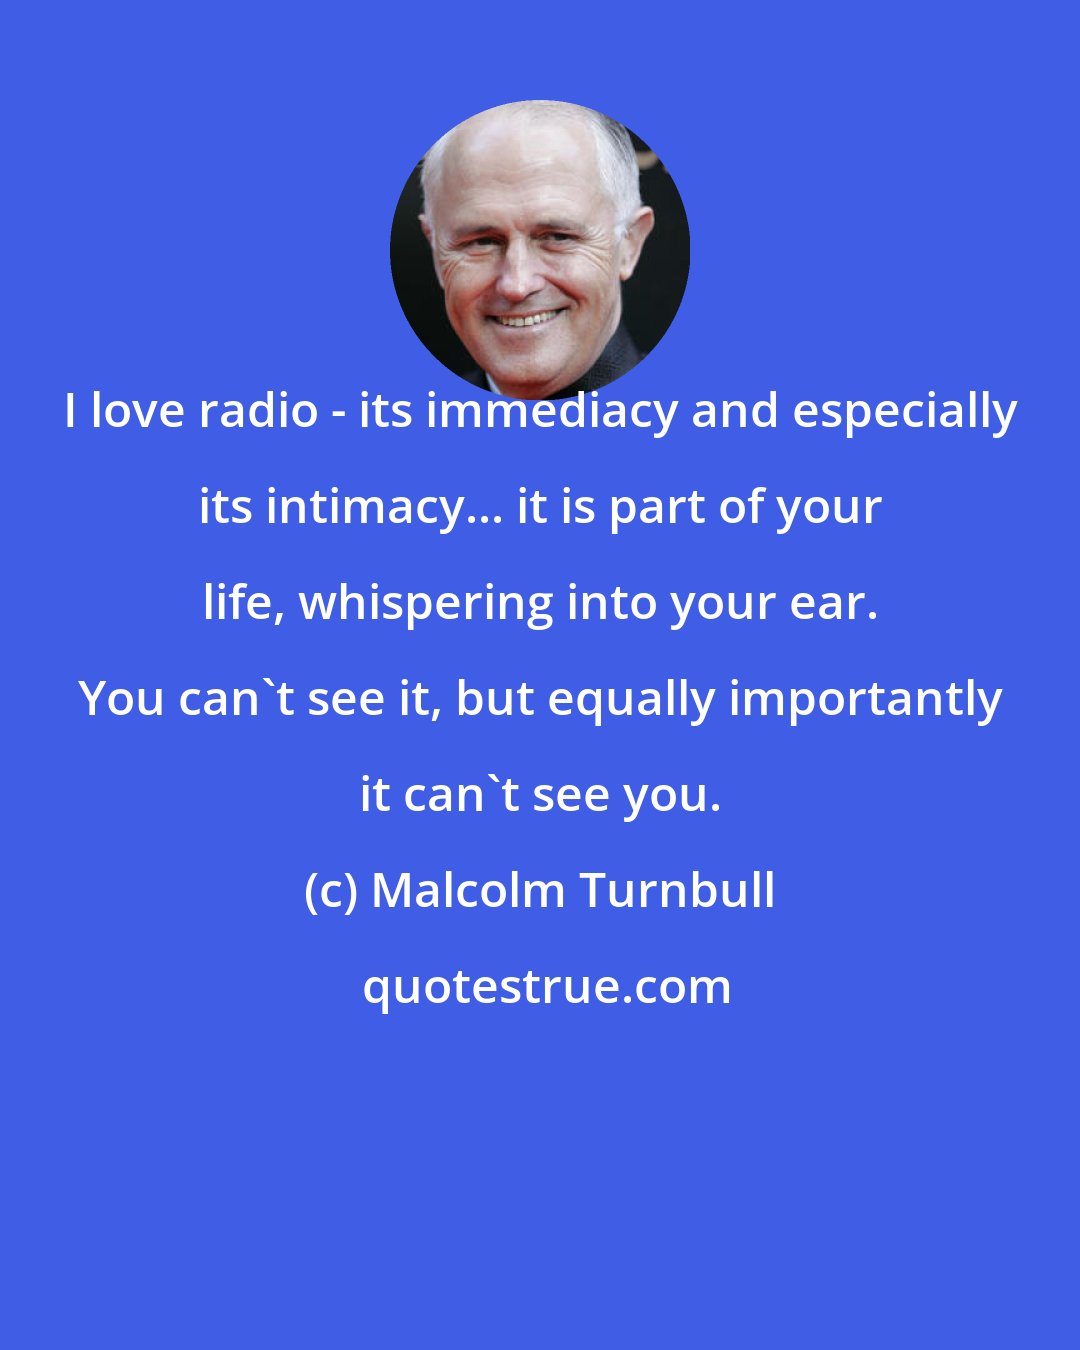 Malcolm Turnbull: I love radio - its immediacy and especially its intimacy... it is part of your life, whispering into your ear. You can't see it, but equally importantly it can't see you.